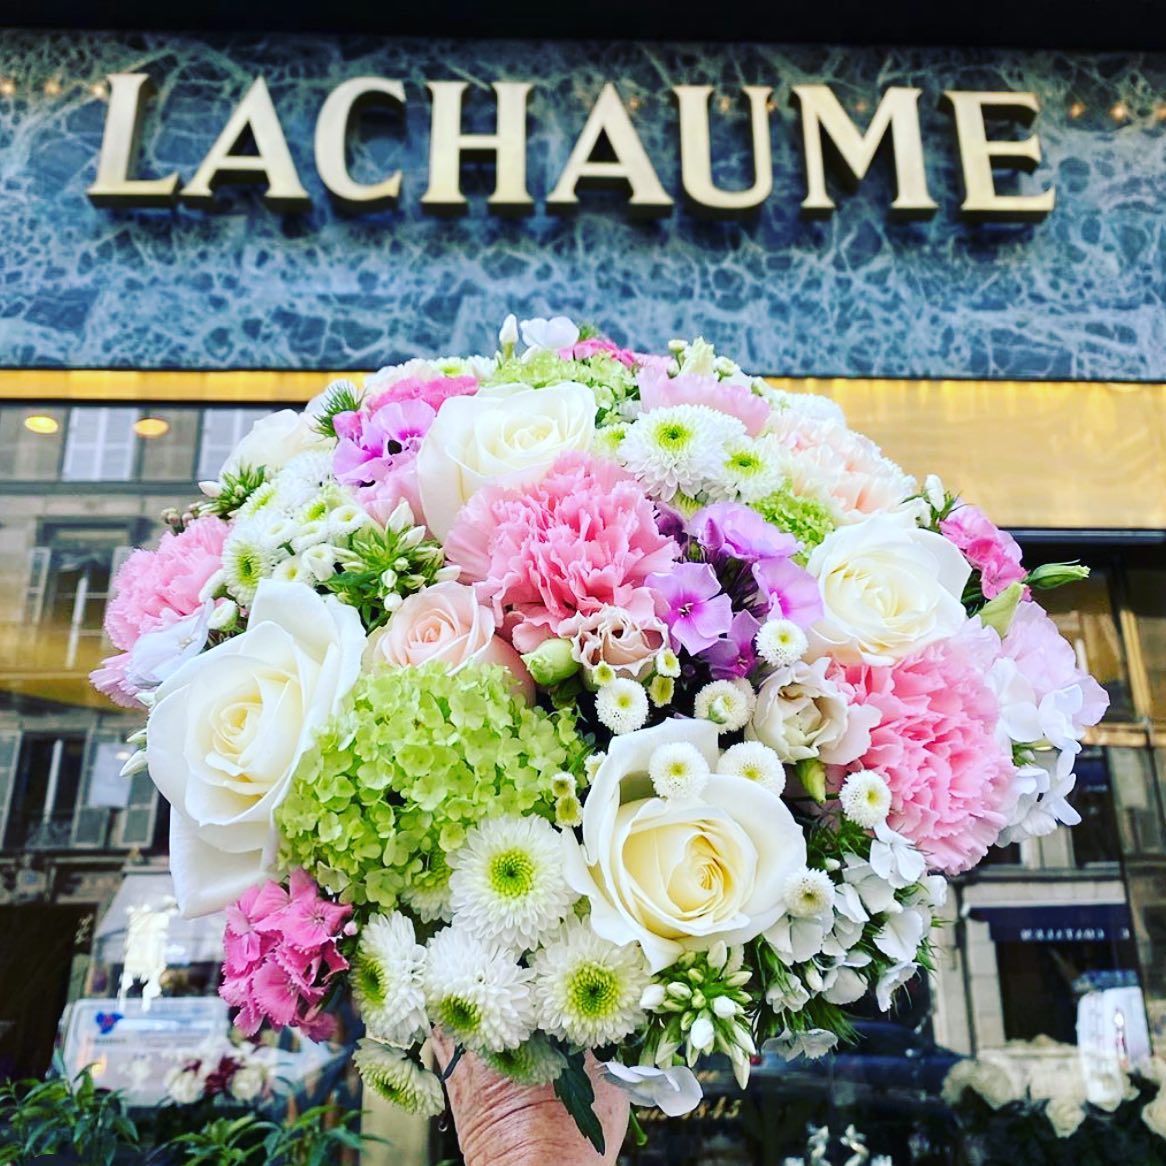 Where does Karl Lagerfeld buy his flowers Lachaume011